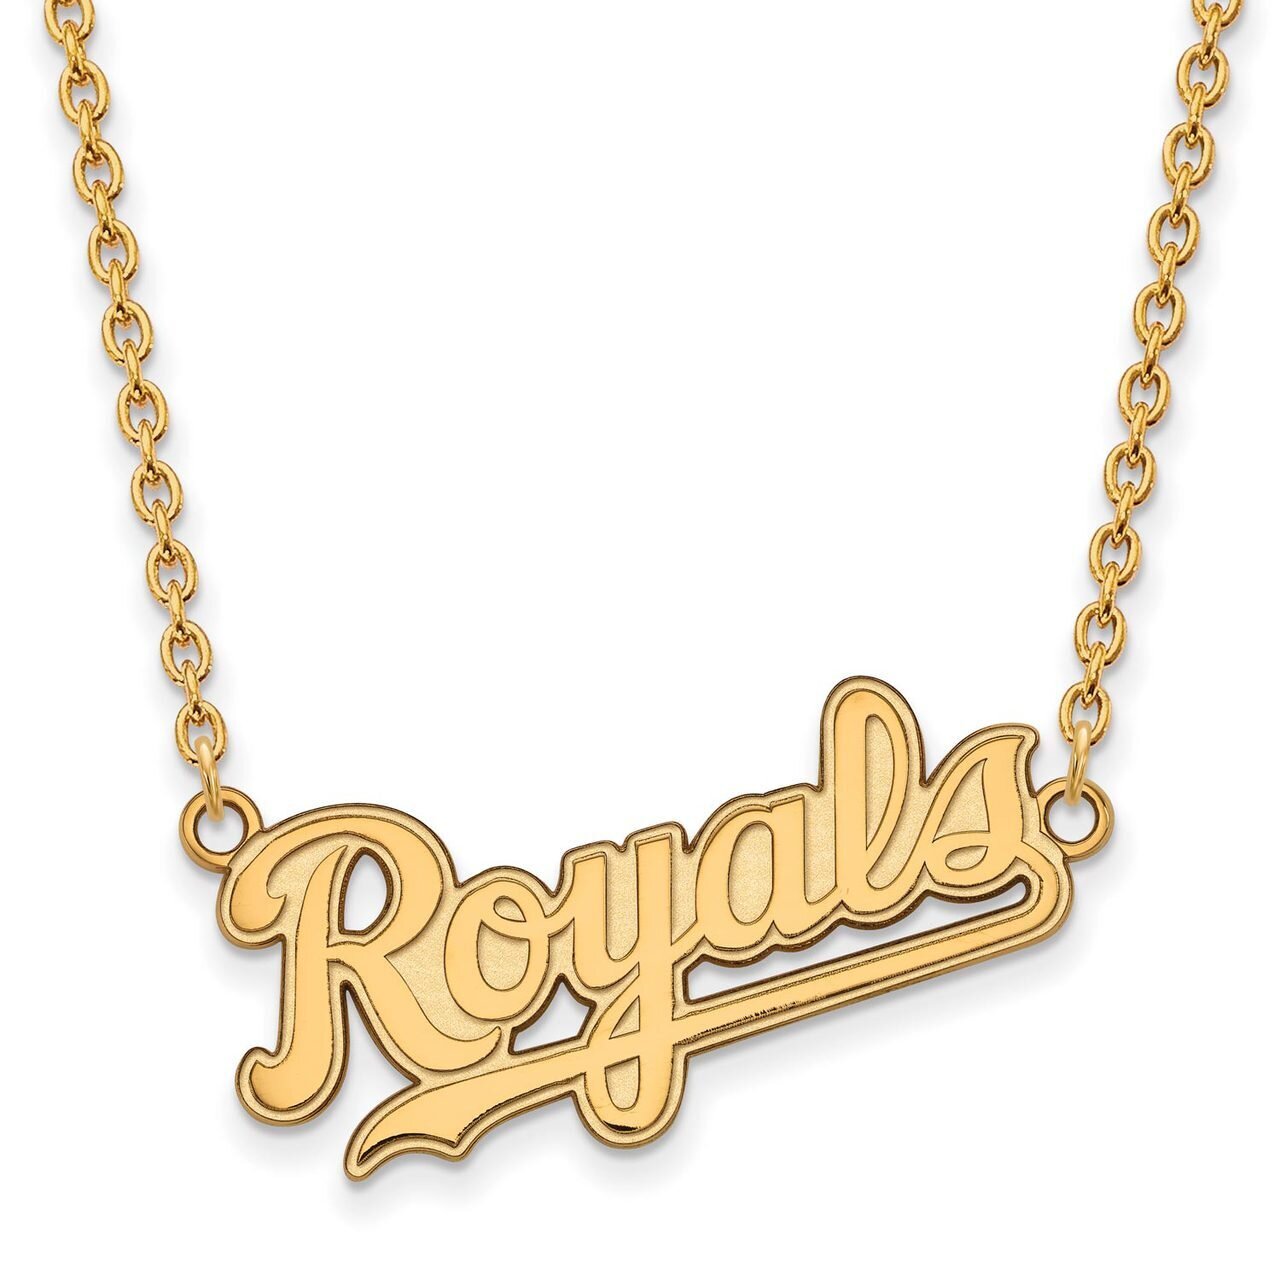 Kansas City Royals Large Pendant with Chain Necklace Gold-plated Silver GP019ROY-18